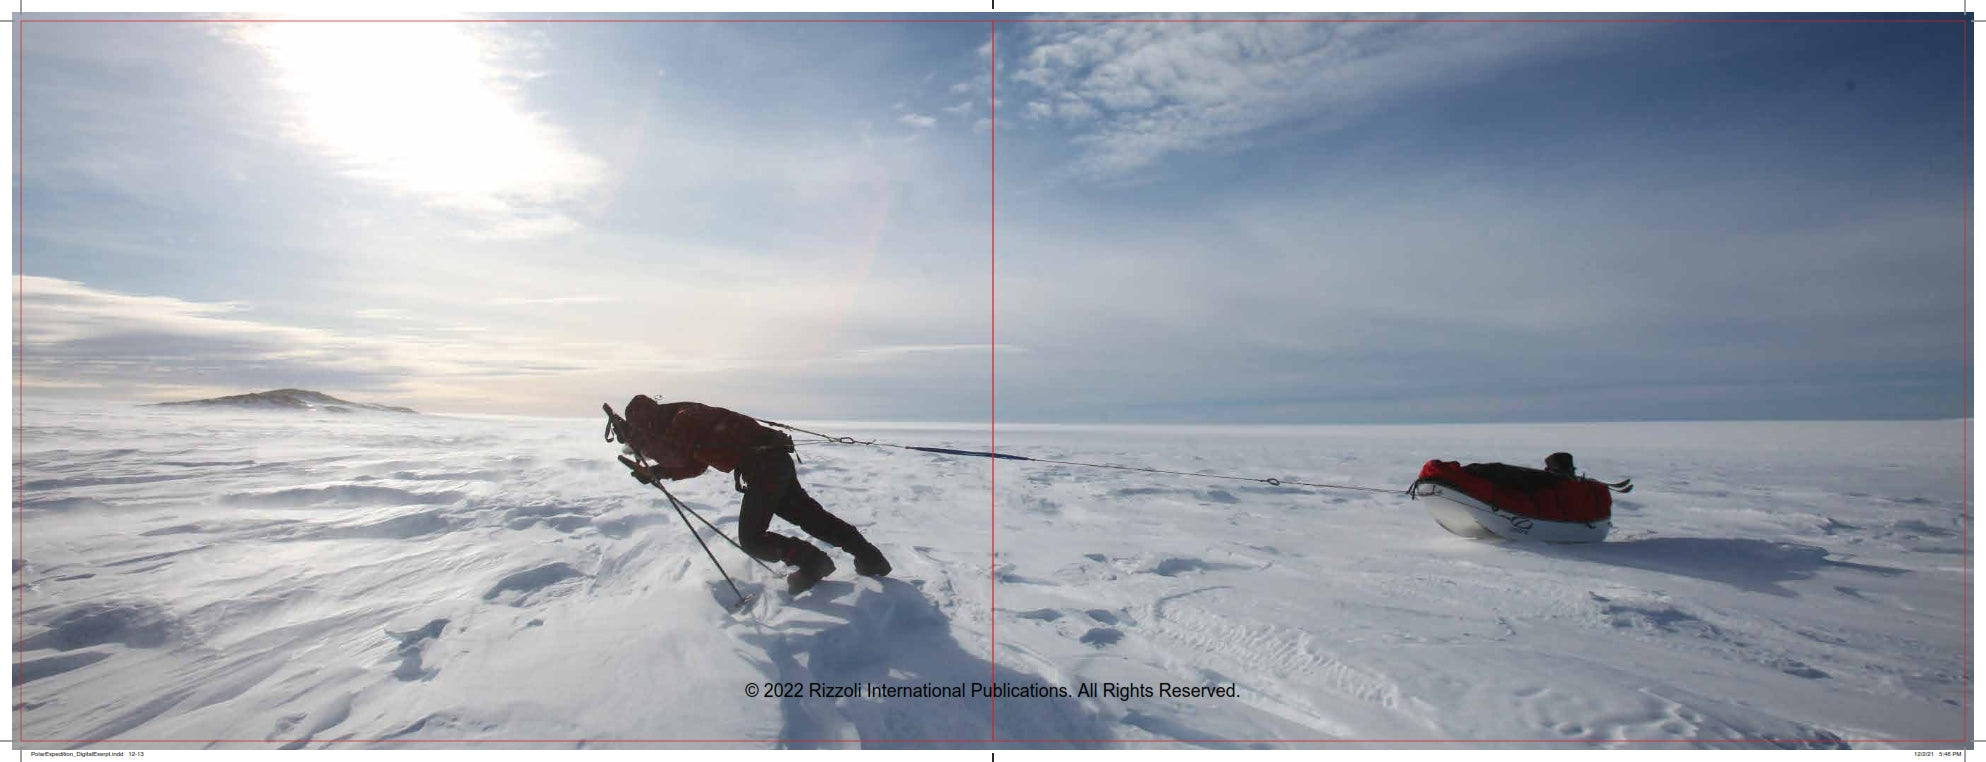 Polar Explorations: To the Ends of the Earth